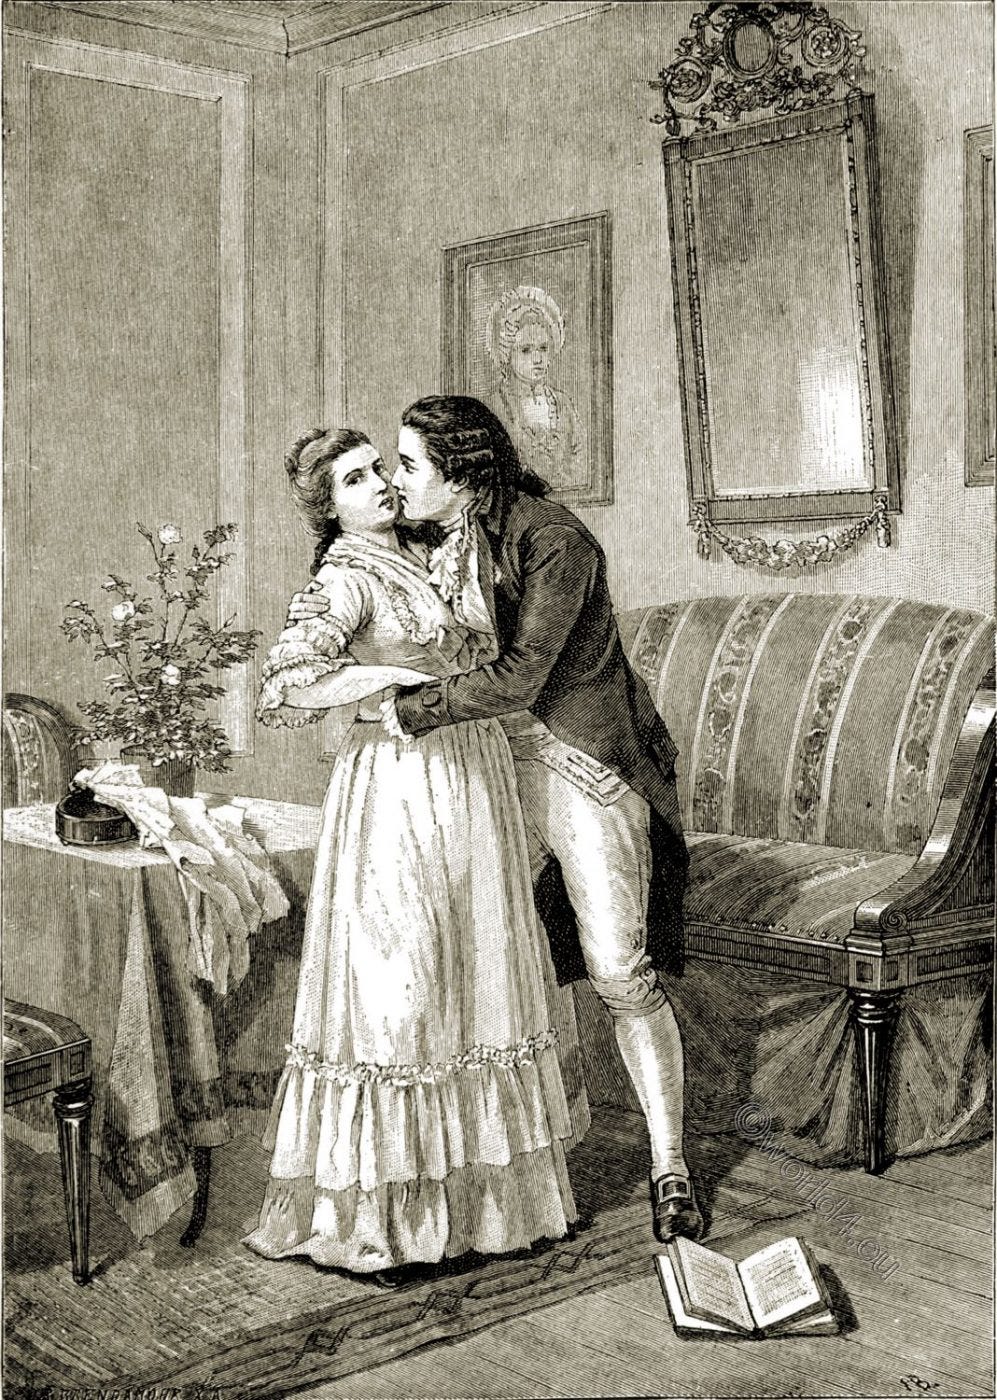 Werther and Charlotte. Goethe, The Sorrows of Young Werther (1774).